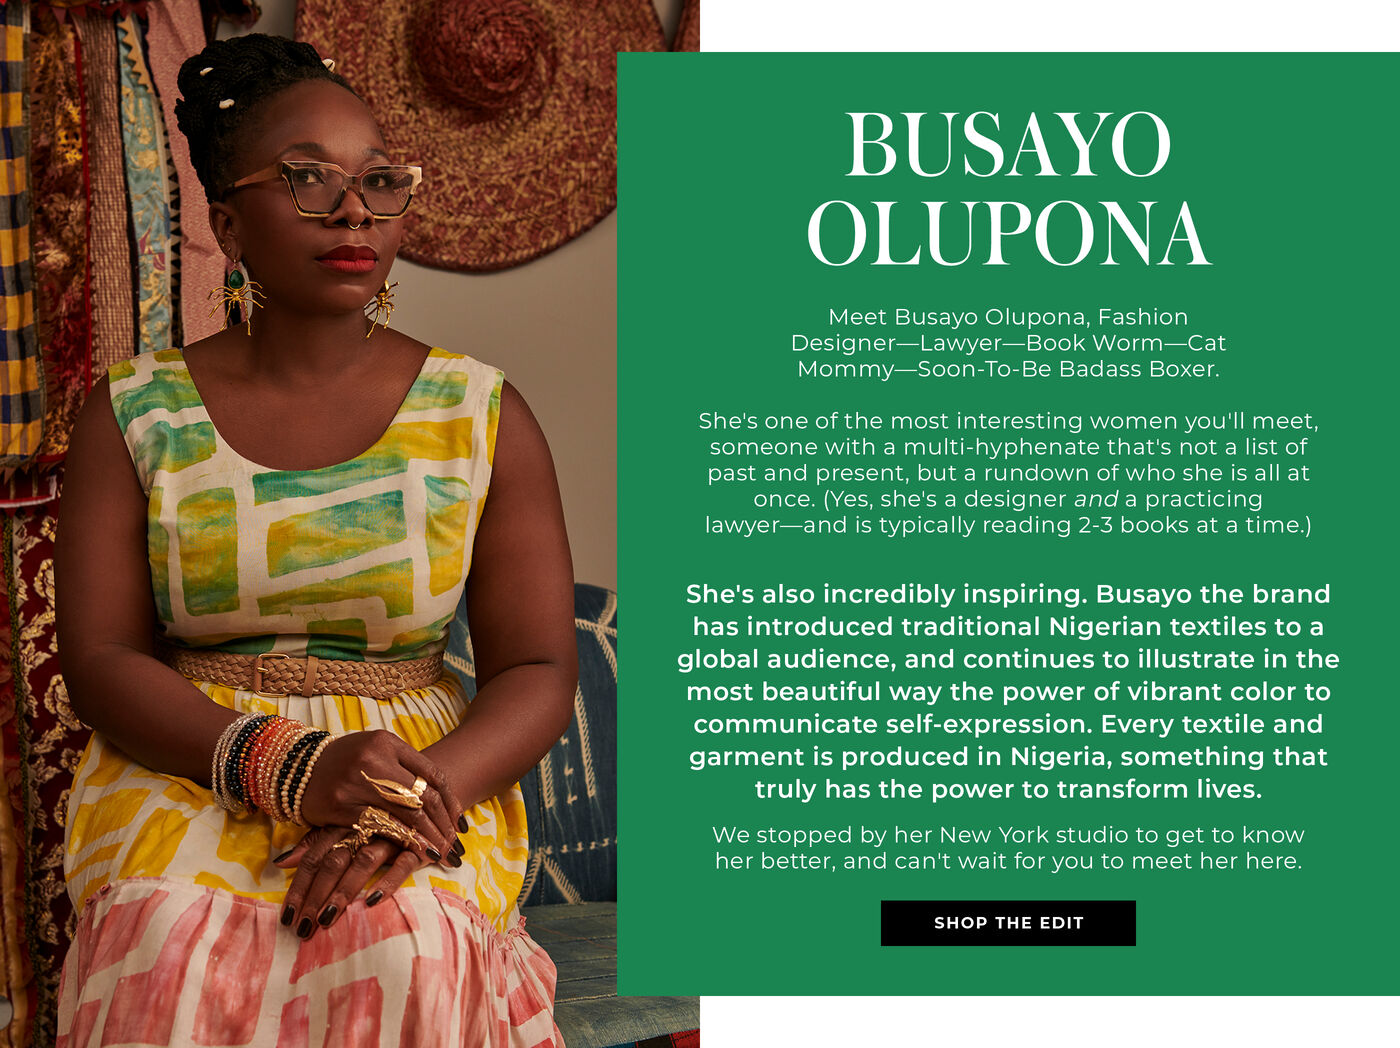 "BUSAYO OLUPONA Meet Busayo Olupona, Fashion Designer—Lawyer—Book Worm—Cat Mommy—Soon-To-Be Badass Boxer.   She's one of the most interesting women you'll meet, someone with a multi-hyphenate that's not a list of past and present, but a run down of who she is all at once. (Yes, she's a designer and a practicing lawyer—and is typically reading 2-3 books at a time.)  She's also incredibly inspiring. Busayo the brand has introduced traditional Nigerian textiles to a global audience, and continues to illustrate in the most beautiful way the power of vibrant color to communicate self-expression. Every textile and garment is produced in Nigeria, something that truly has the power to transform lives.   We stopped by her New York studio to get to know her better, and can't wait for you to meet her here."